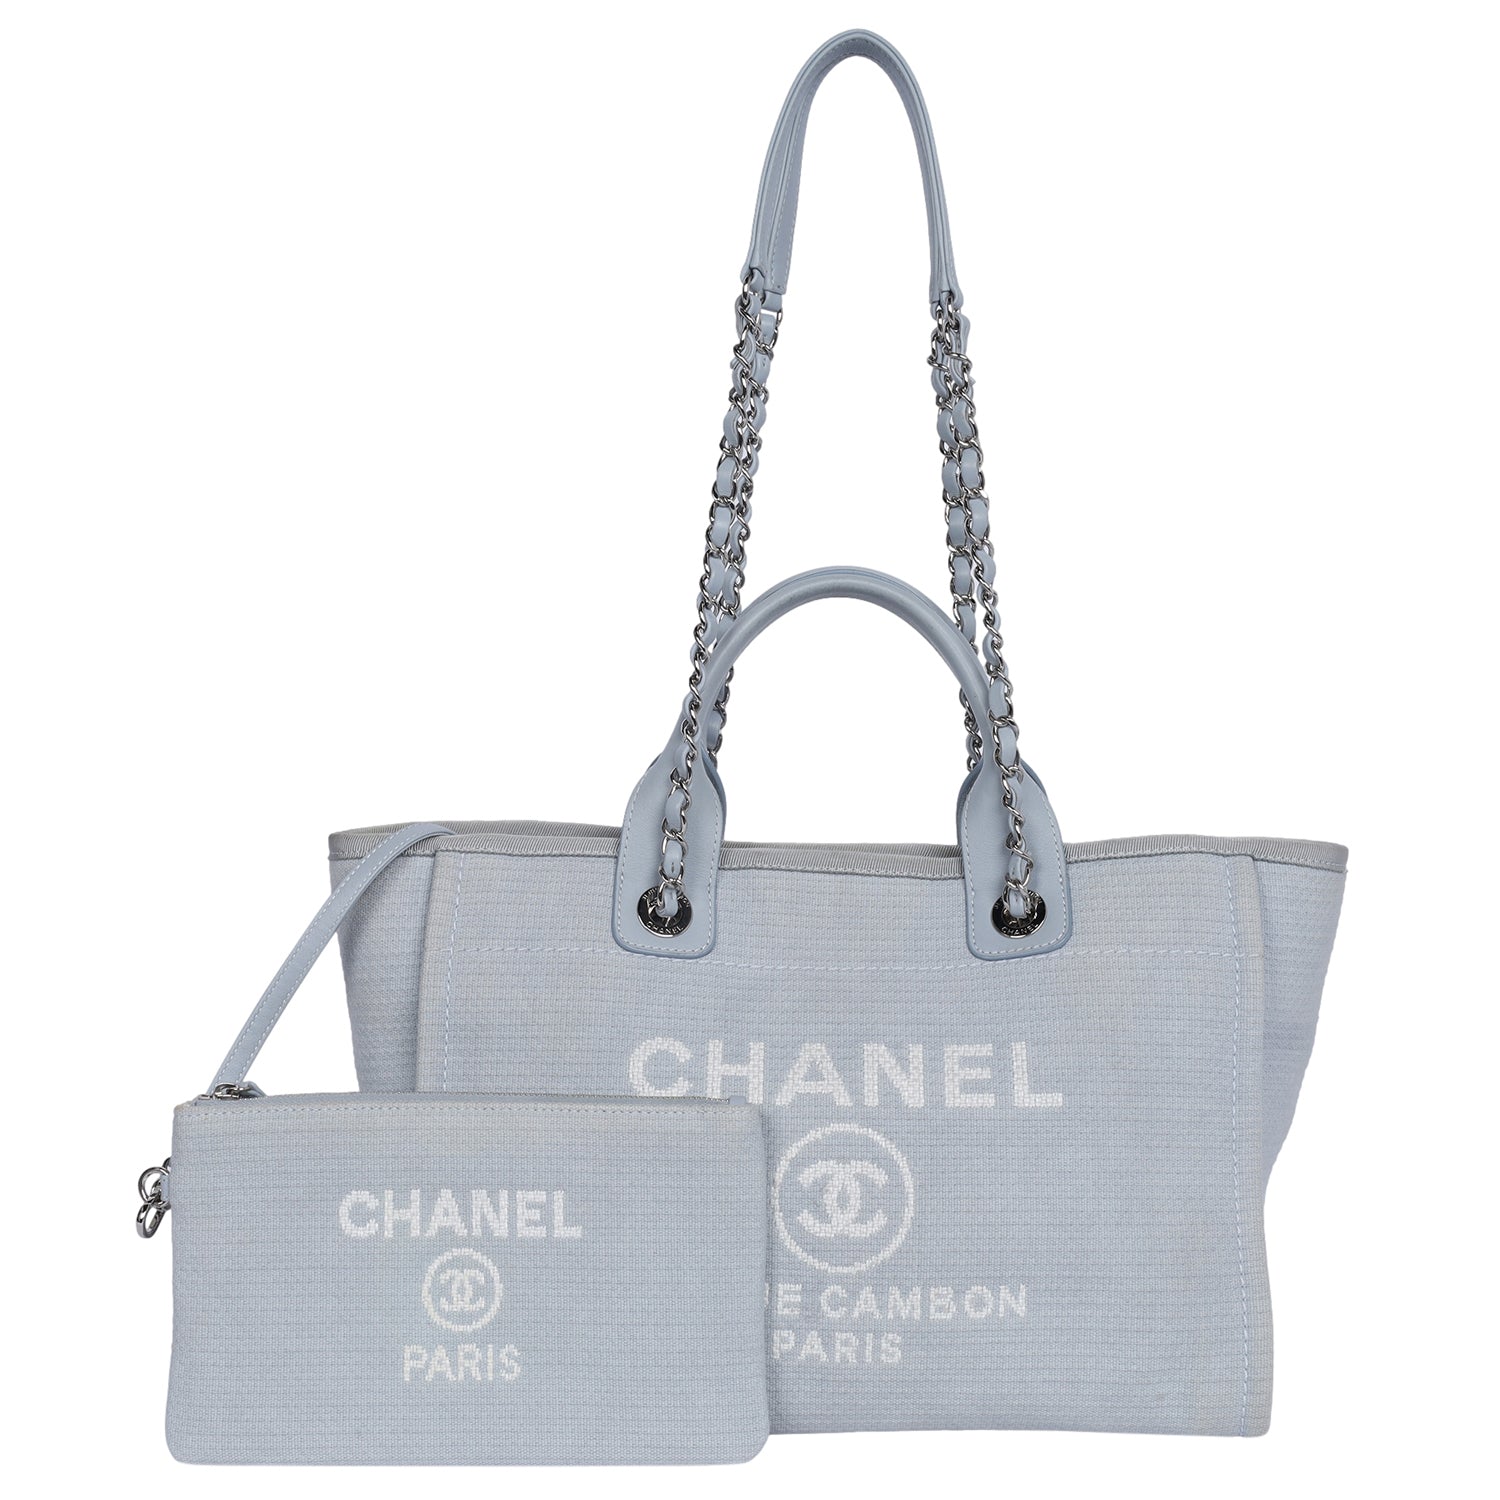 AUTHENTIC CHANEL DEAUVILLE TOTE Large - Mint Condition